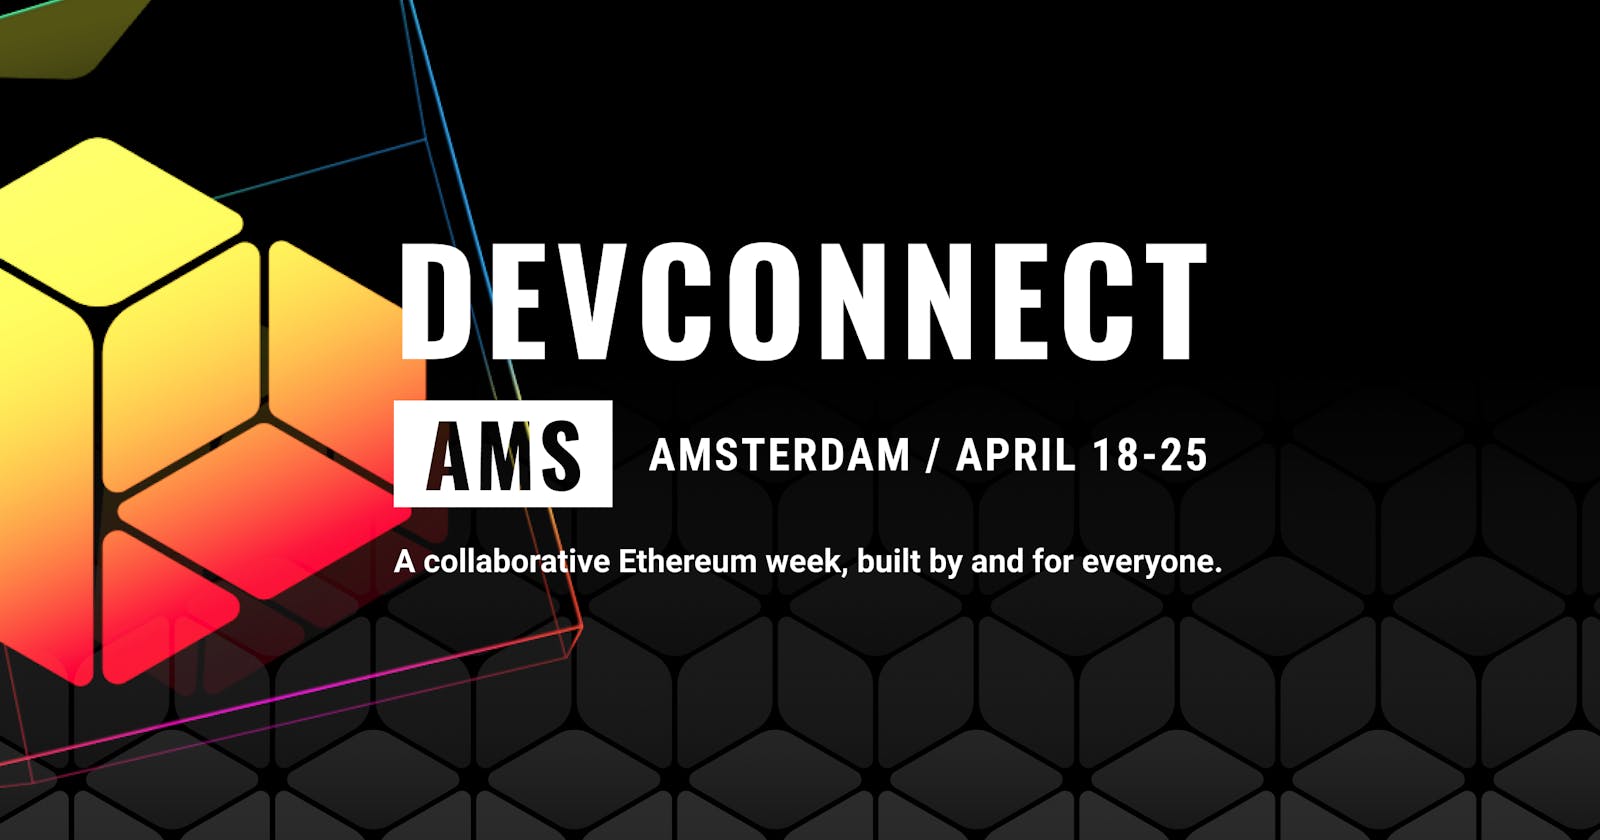 MY DevConnect AMS and ETHAmsterdam Experience and learnings from it